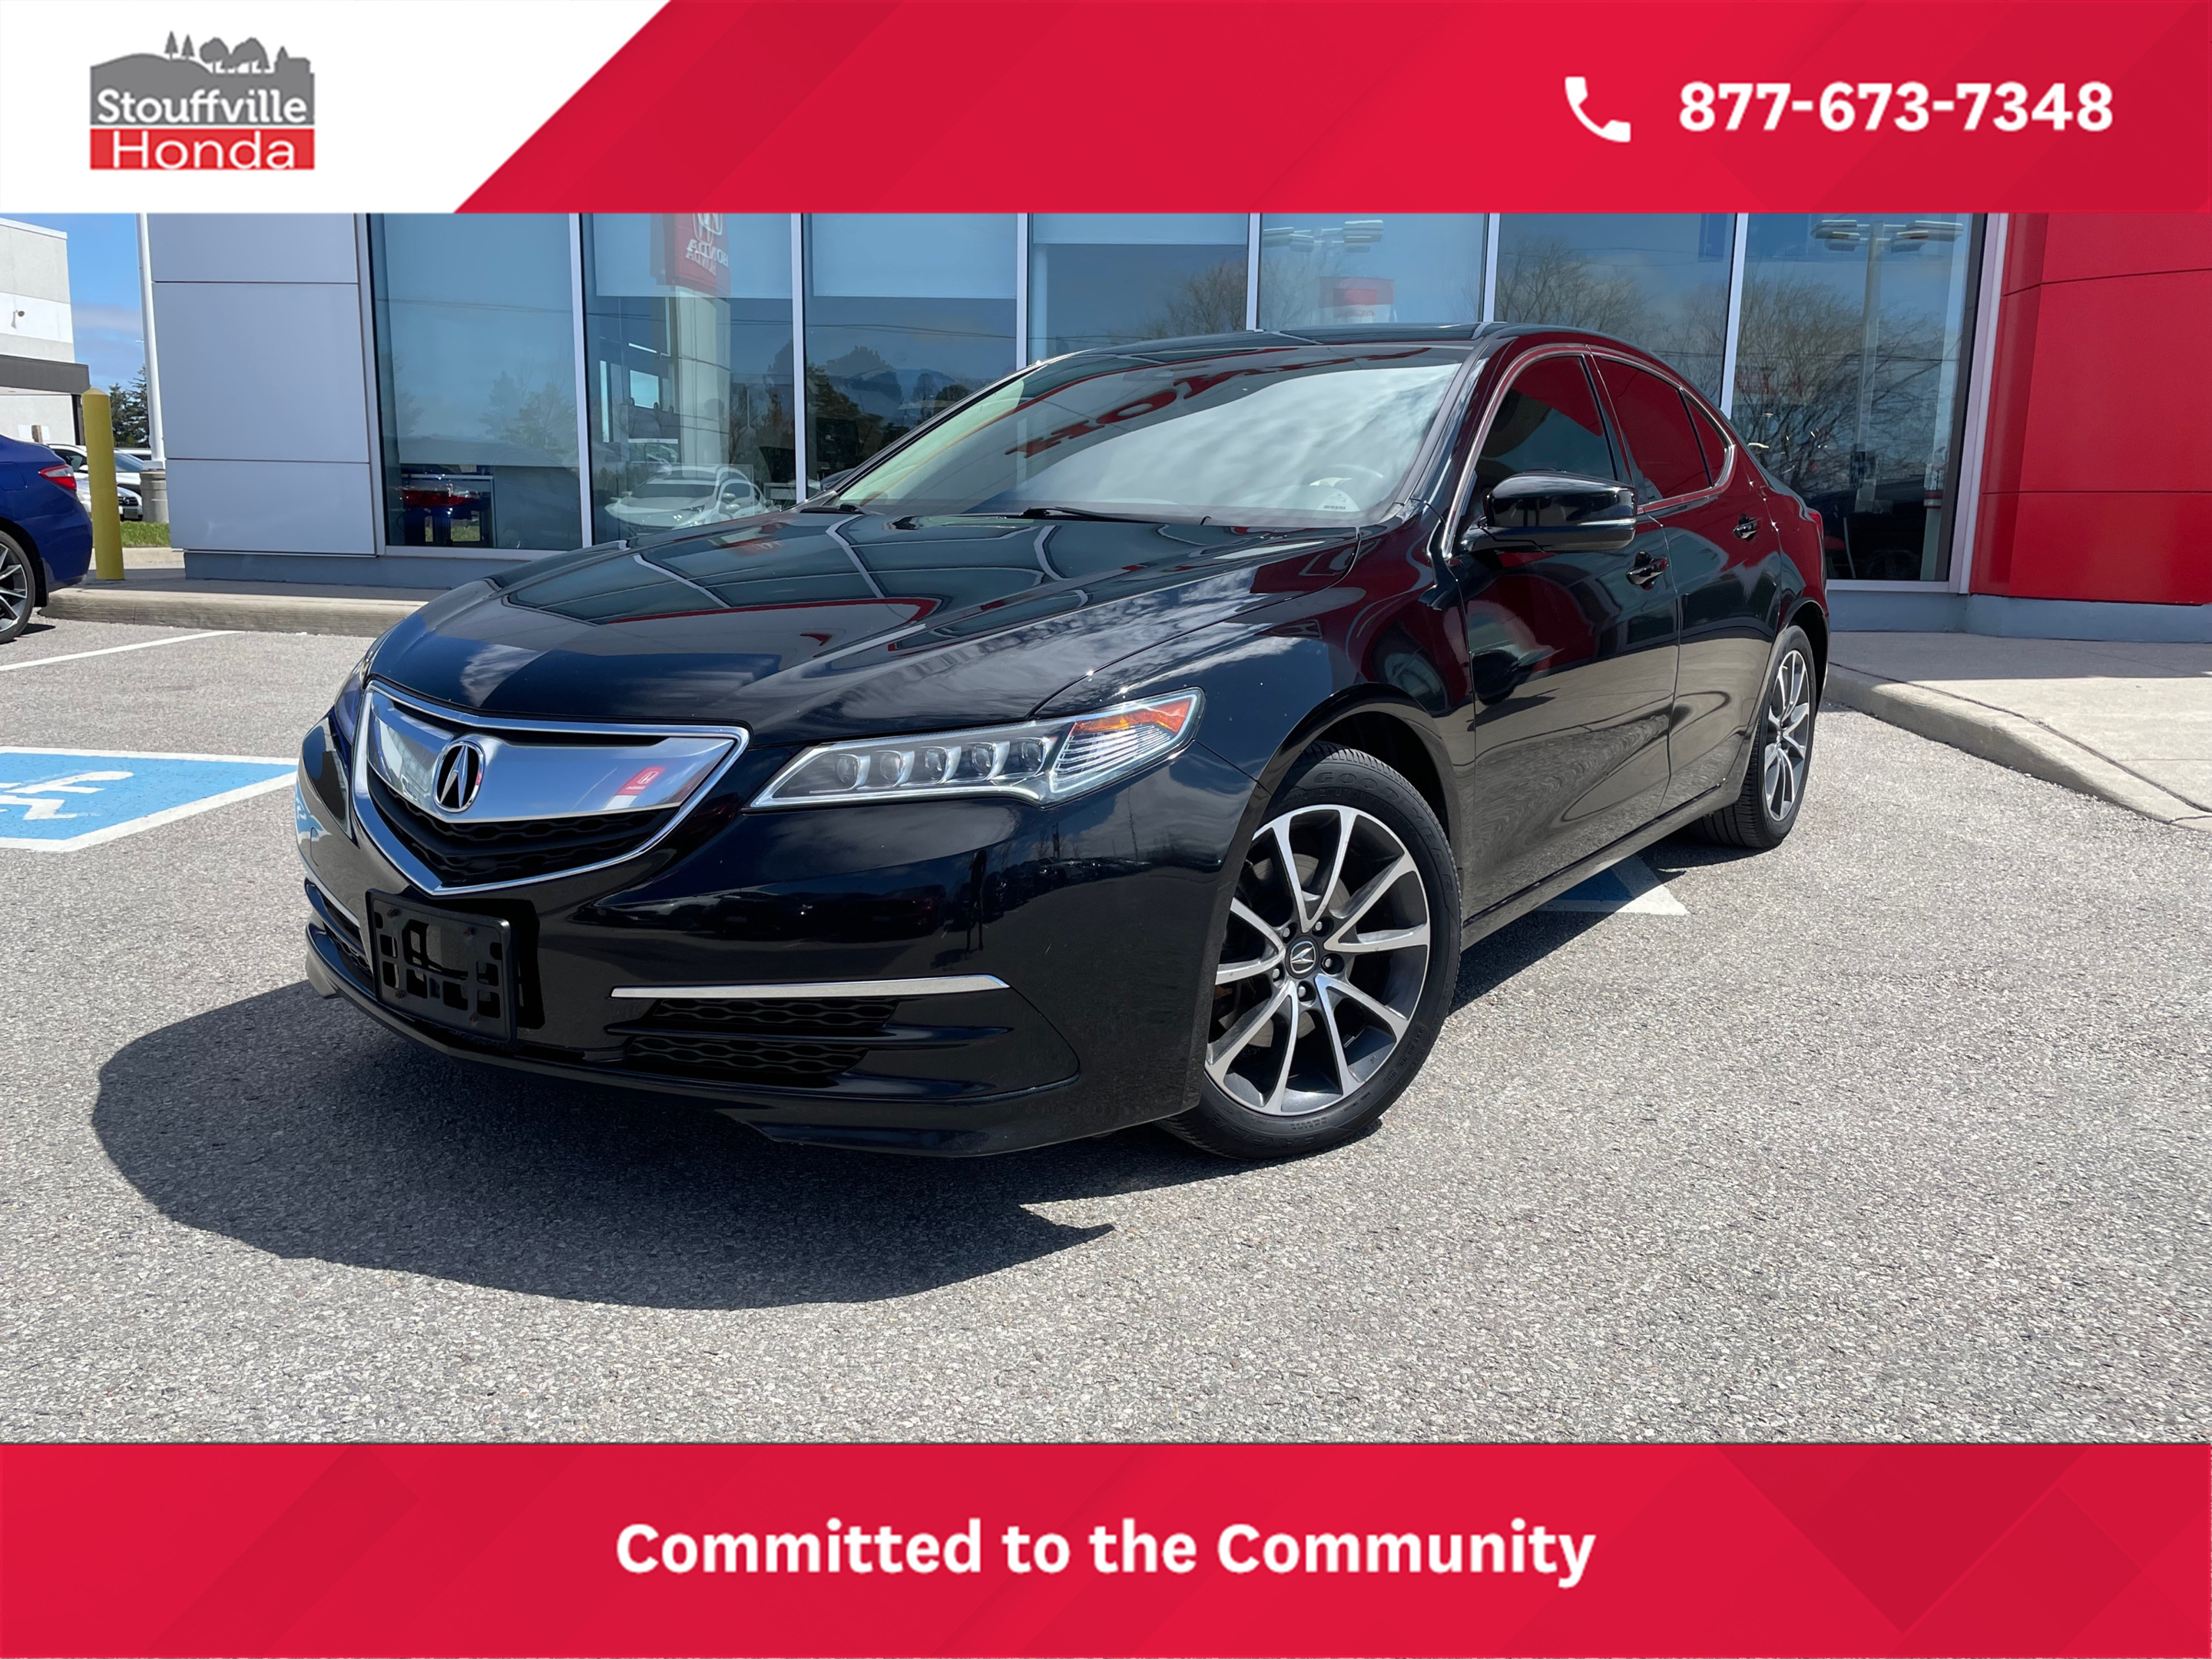 2015 Acura TLX Excellent Condition, V6, 9SPD!!